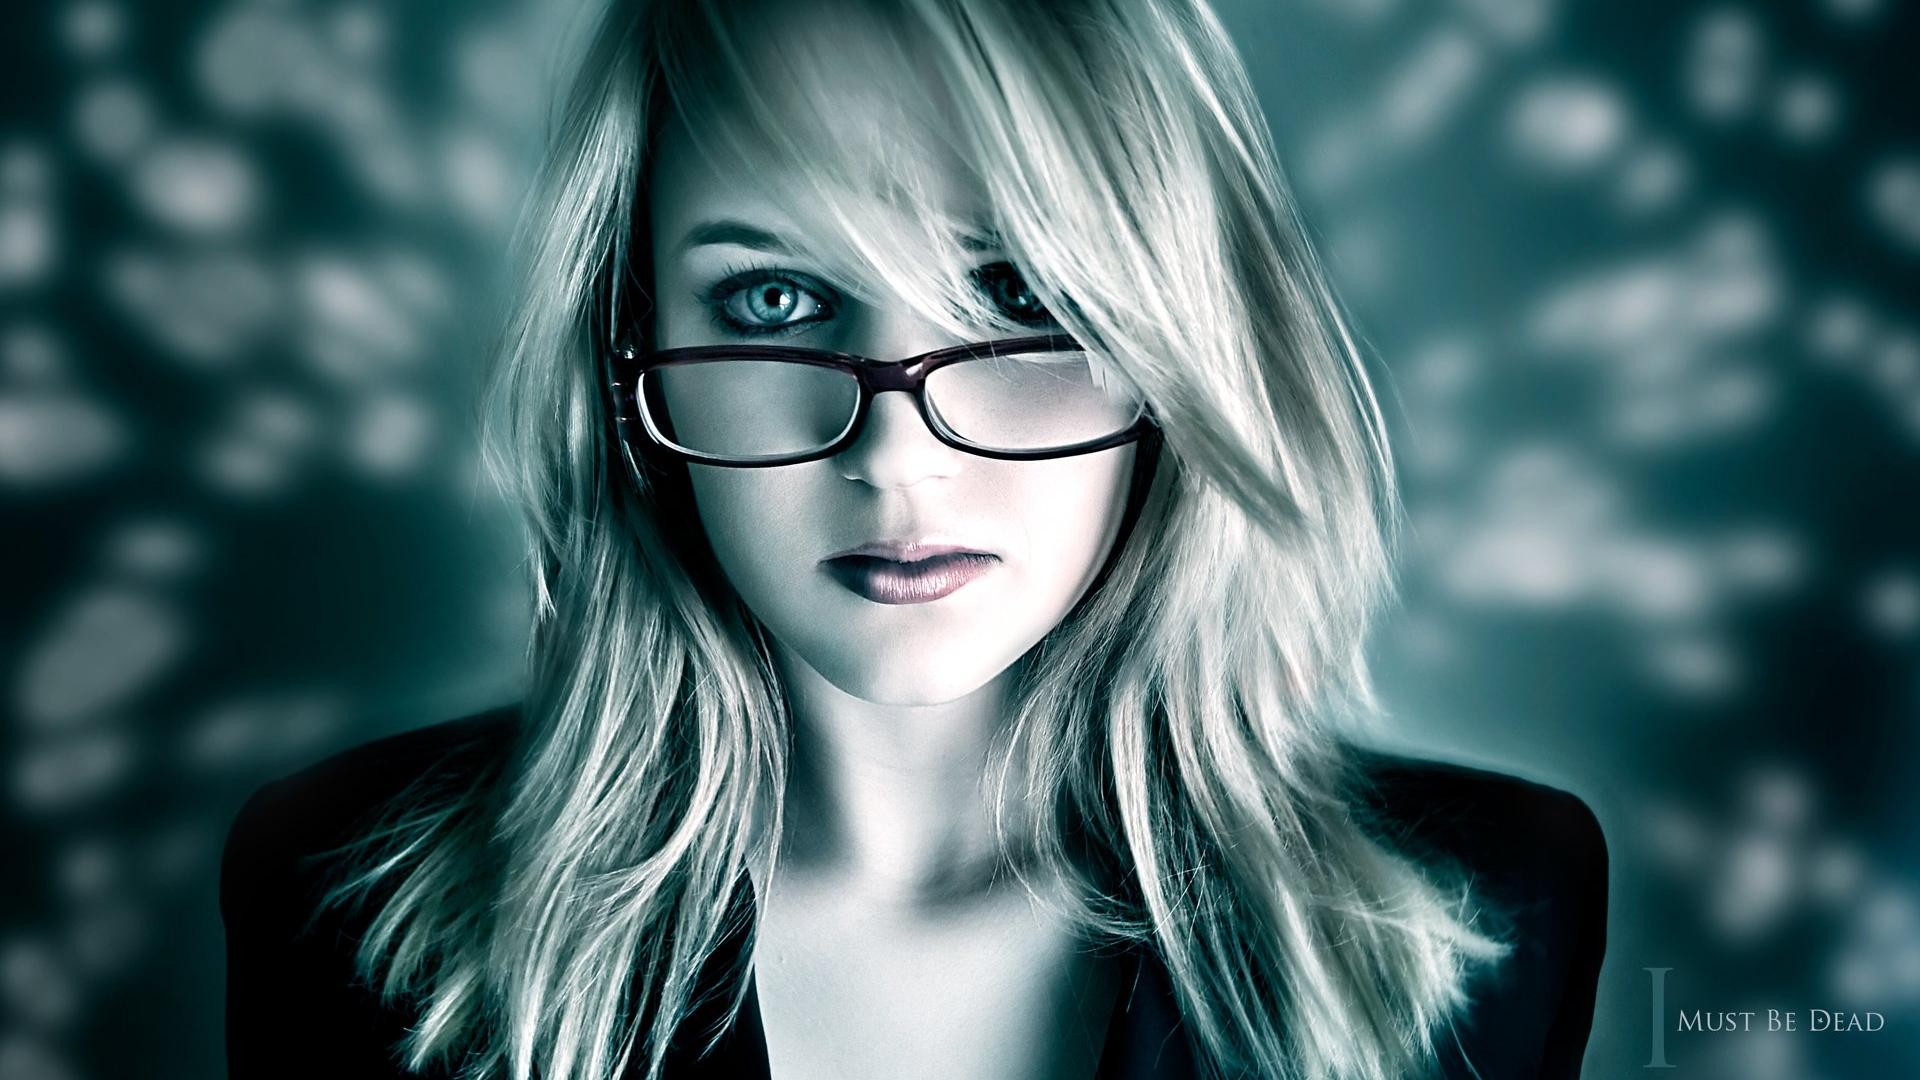 Girls With Glasses wallpaper